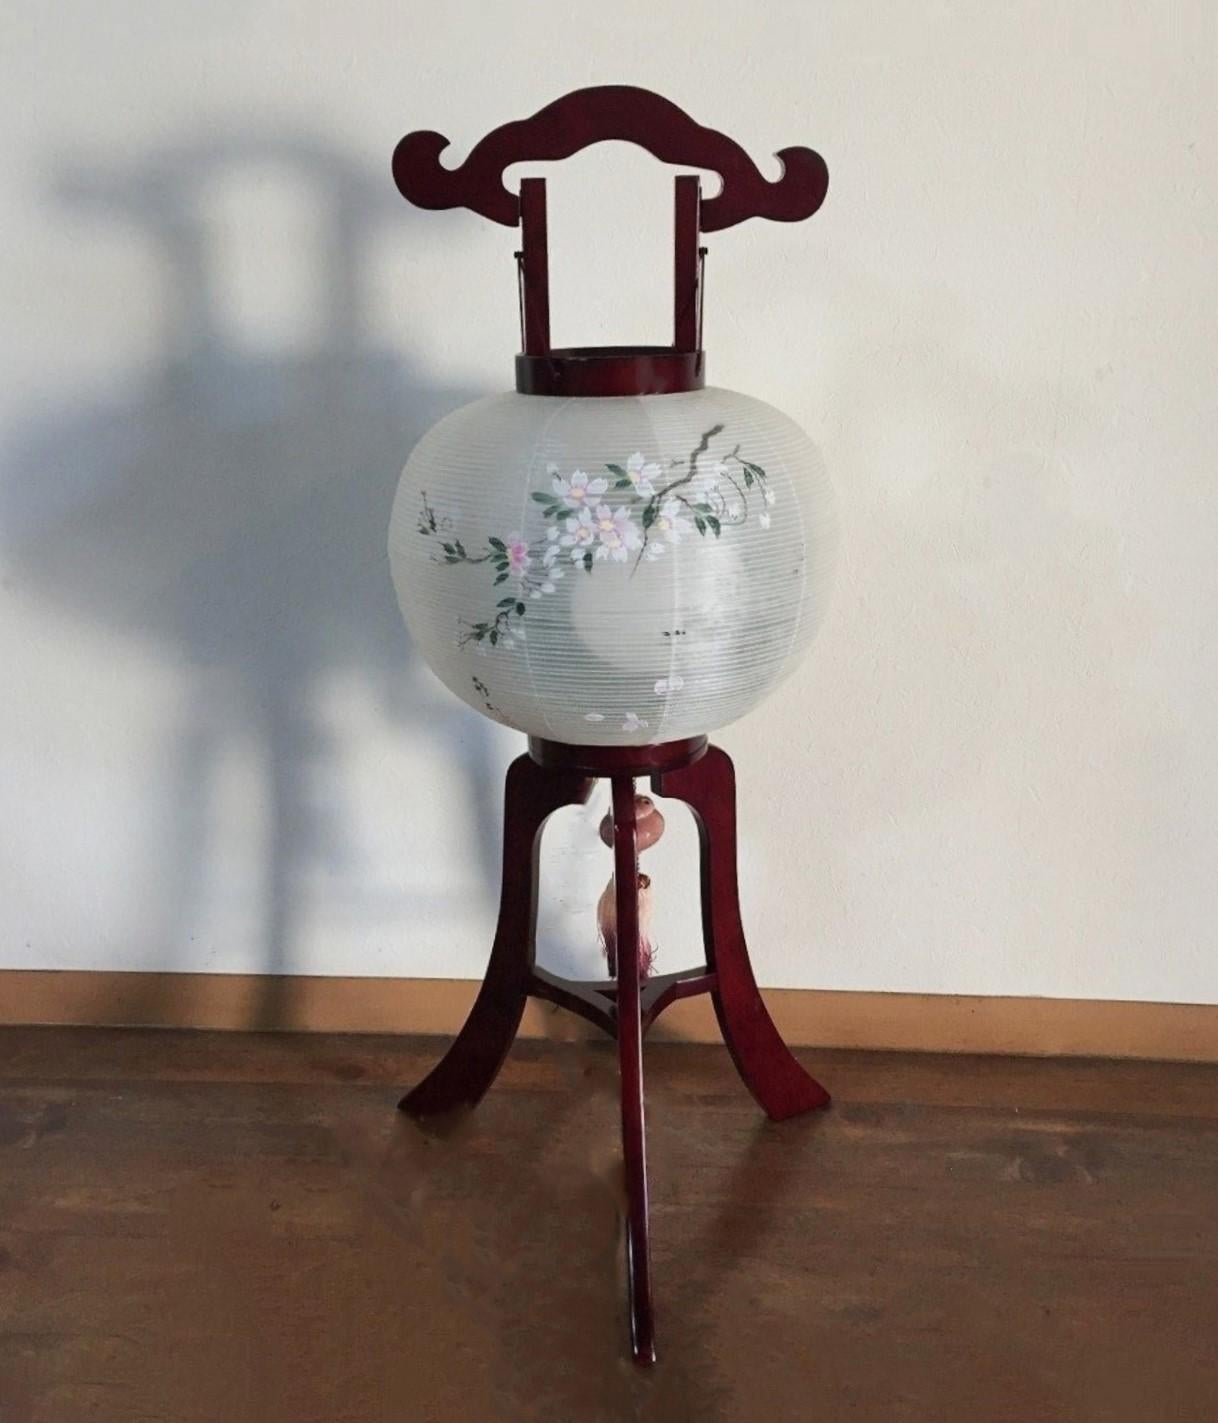 Japanese Vintage Buddhist Chochin Lantern or floor lamp by SUZUKI ANDON, Japan, 1980-1990. Lacquered wood three-legged stand with hand-painted silk shade lantern, signed by the artist: 政和 MASAKAZU. 
These Chochin lanterns are displayed in front of